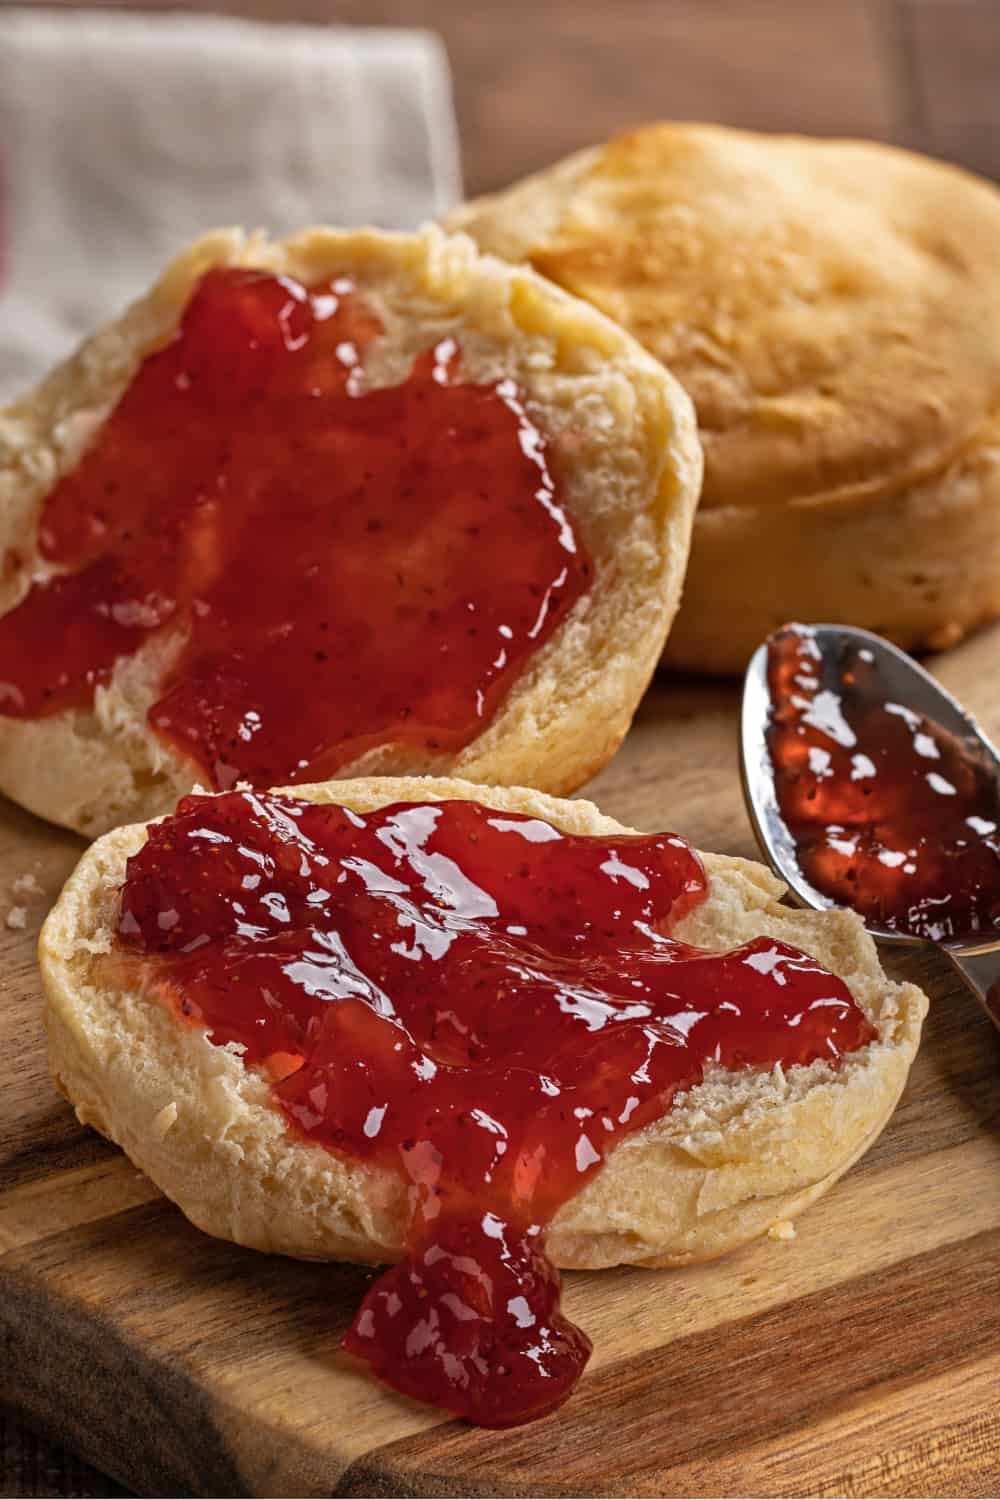 English muffin spread with strawberry preserves on a wooden cutting board